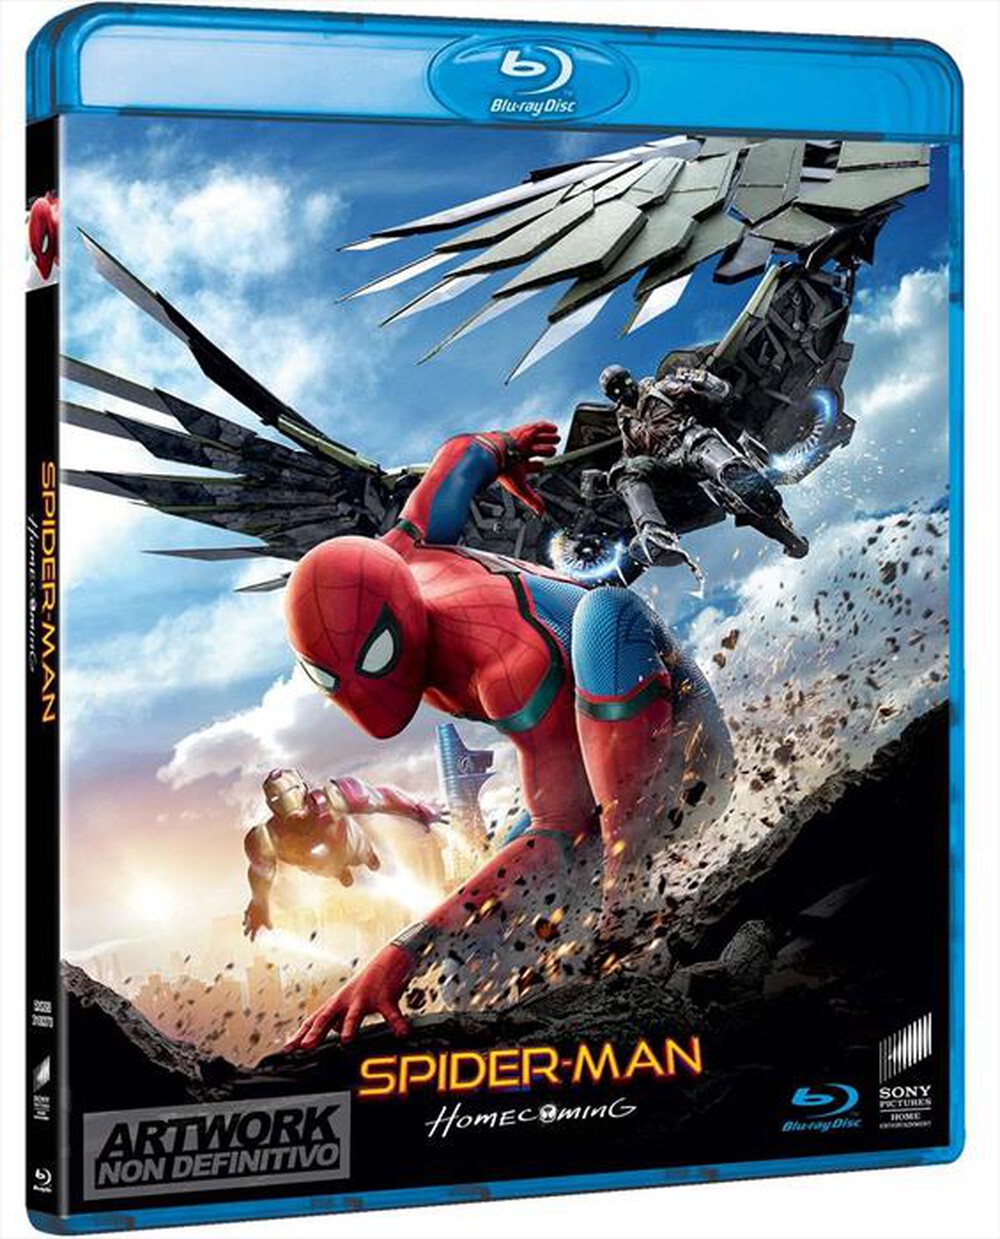 "EAGLE PICTURES - Spider-Man Homecoming"